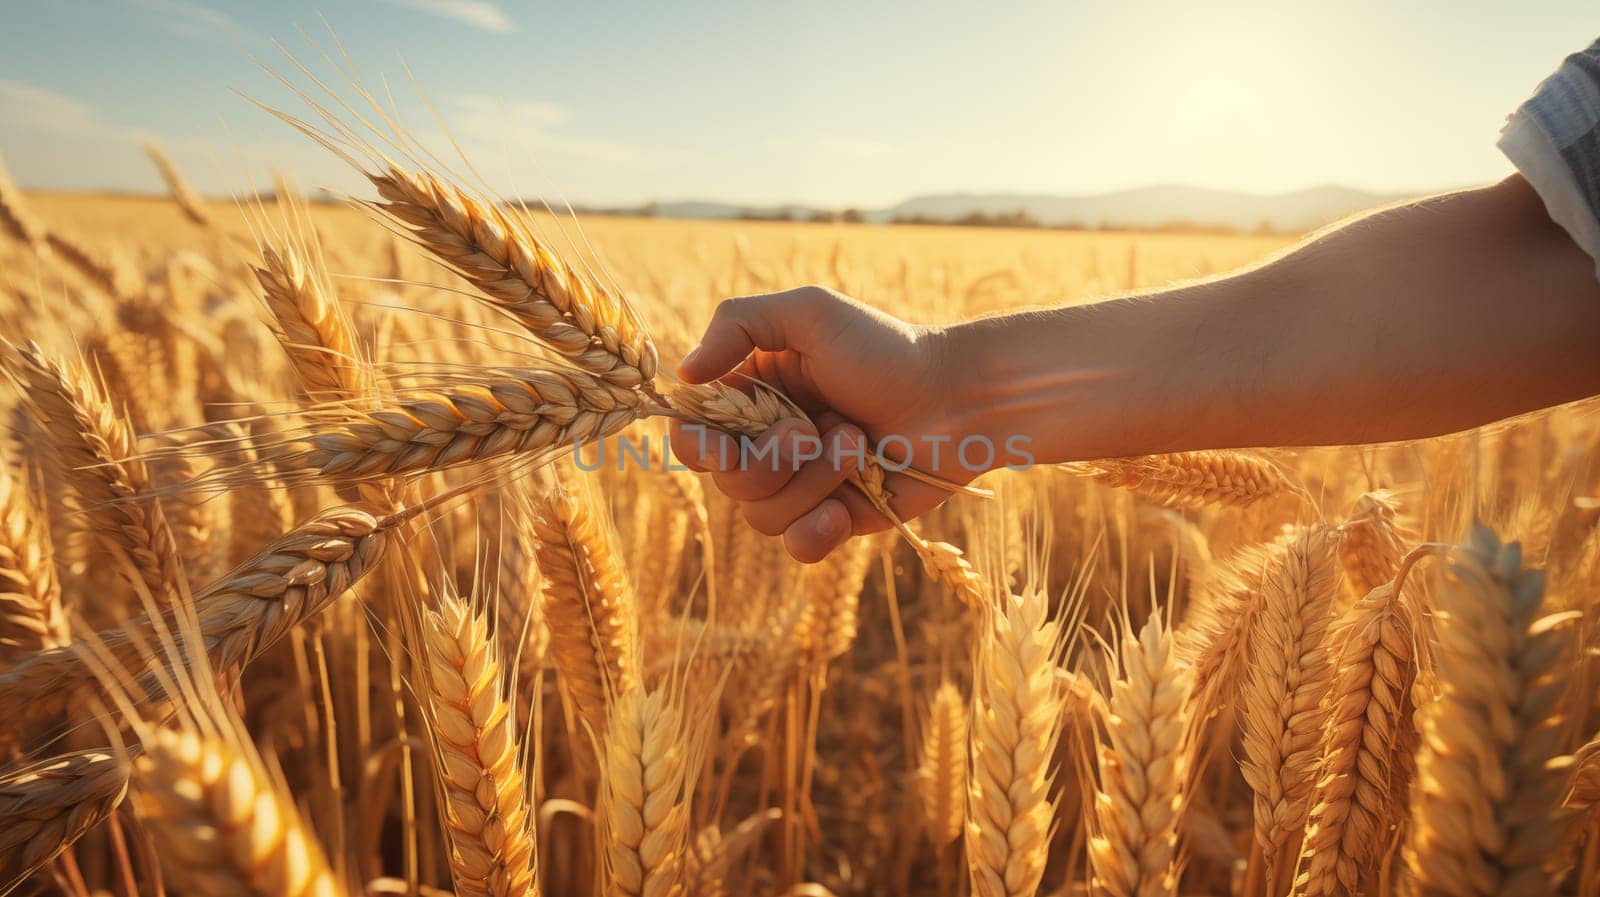 Farmer's hand inspecting ripe wheat in a field with golden wheat by Zakharova